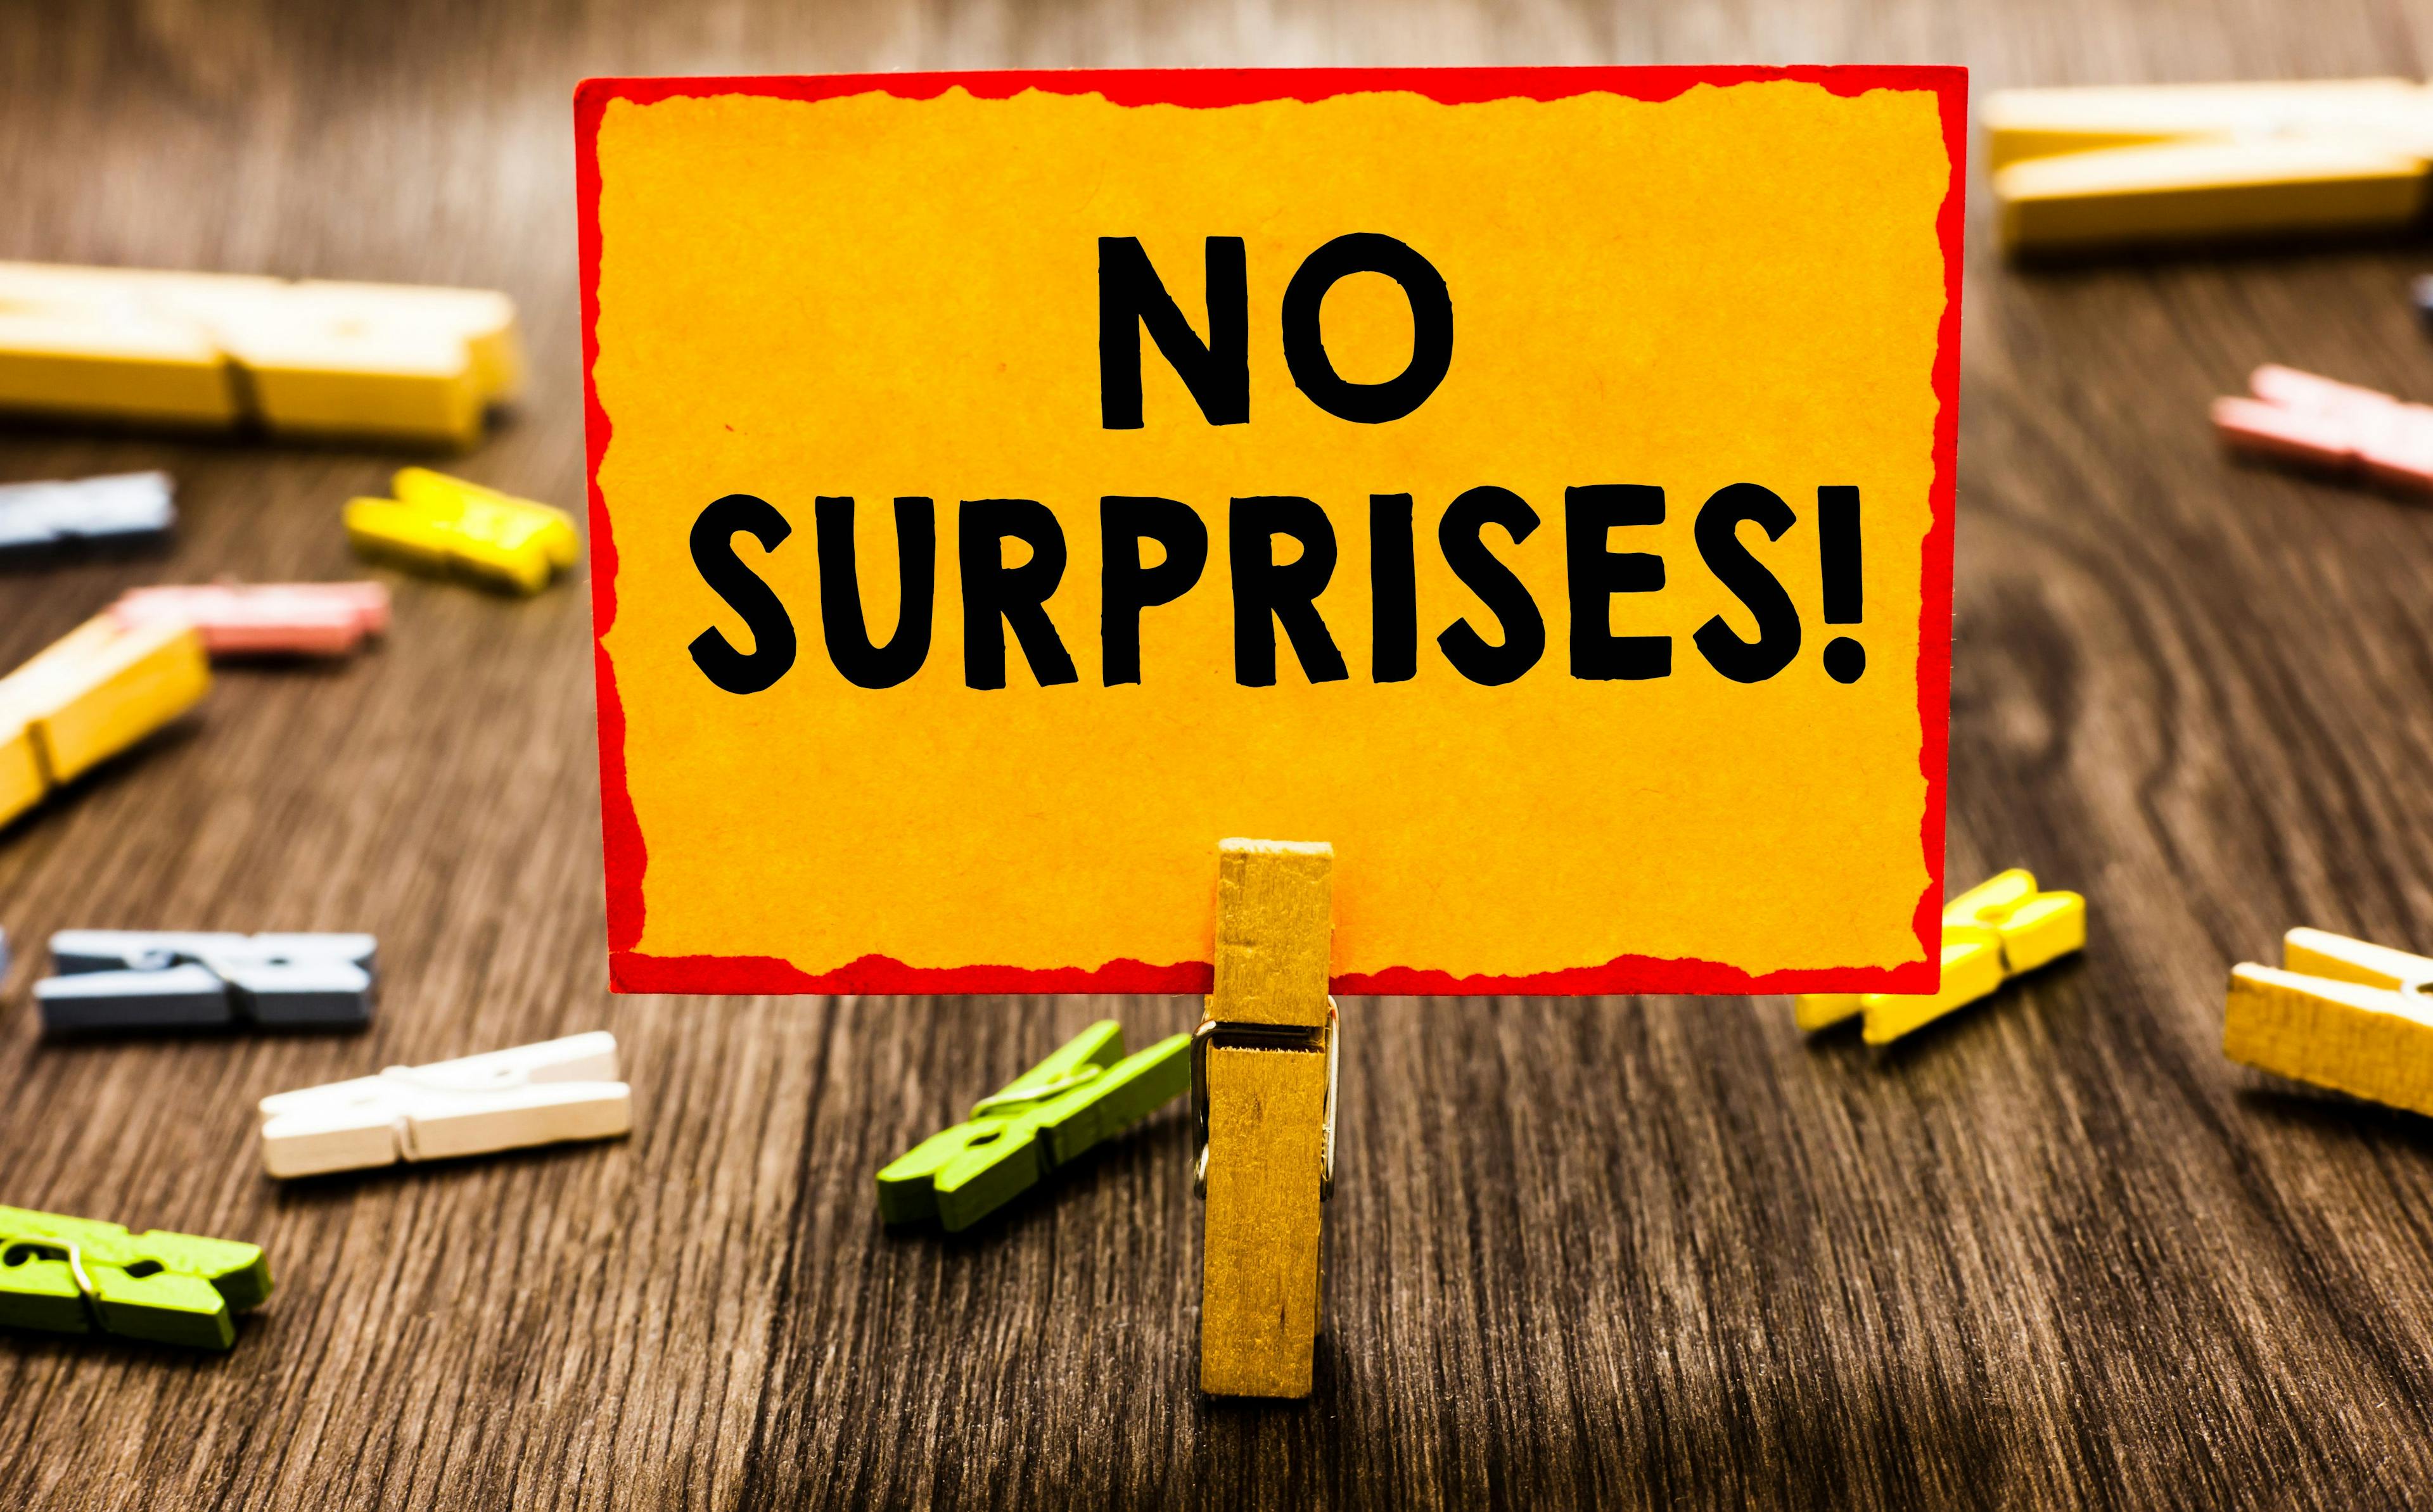 The No Surprises Act: An Overview with Recommendations for Physician Practices